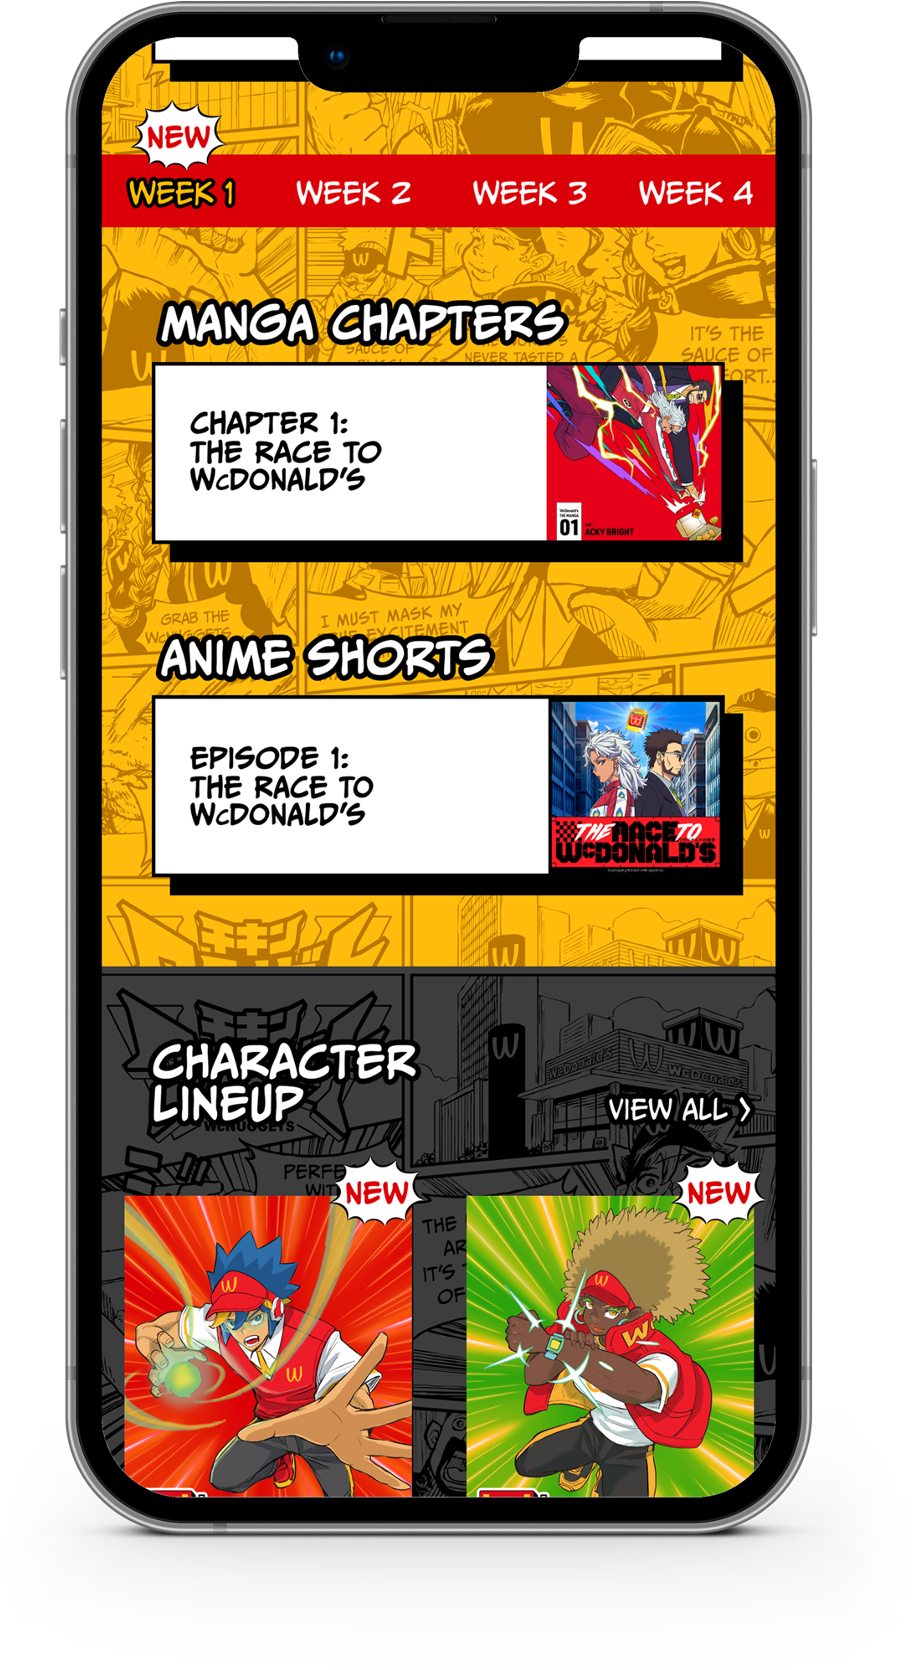 Phone screen with anime and manga content featured.